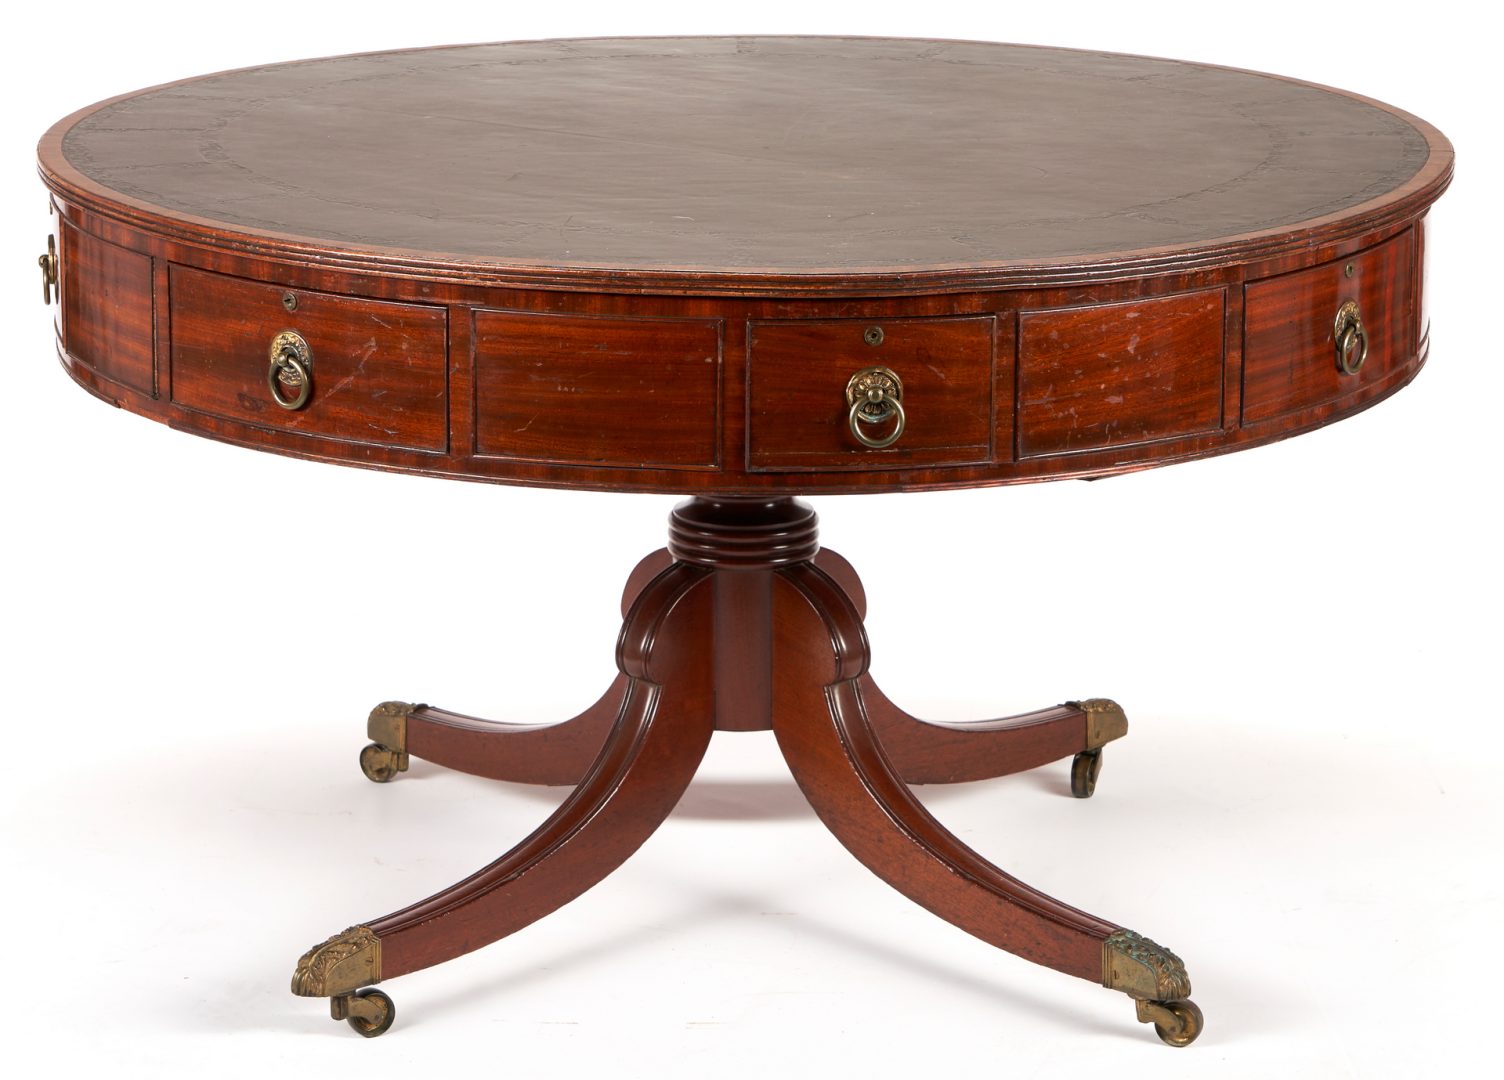 Lot 276: English Regency Style "Rent" or Center Table